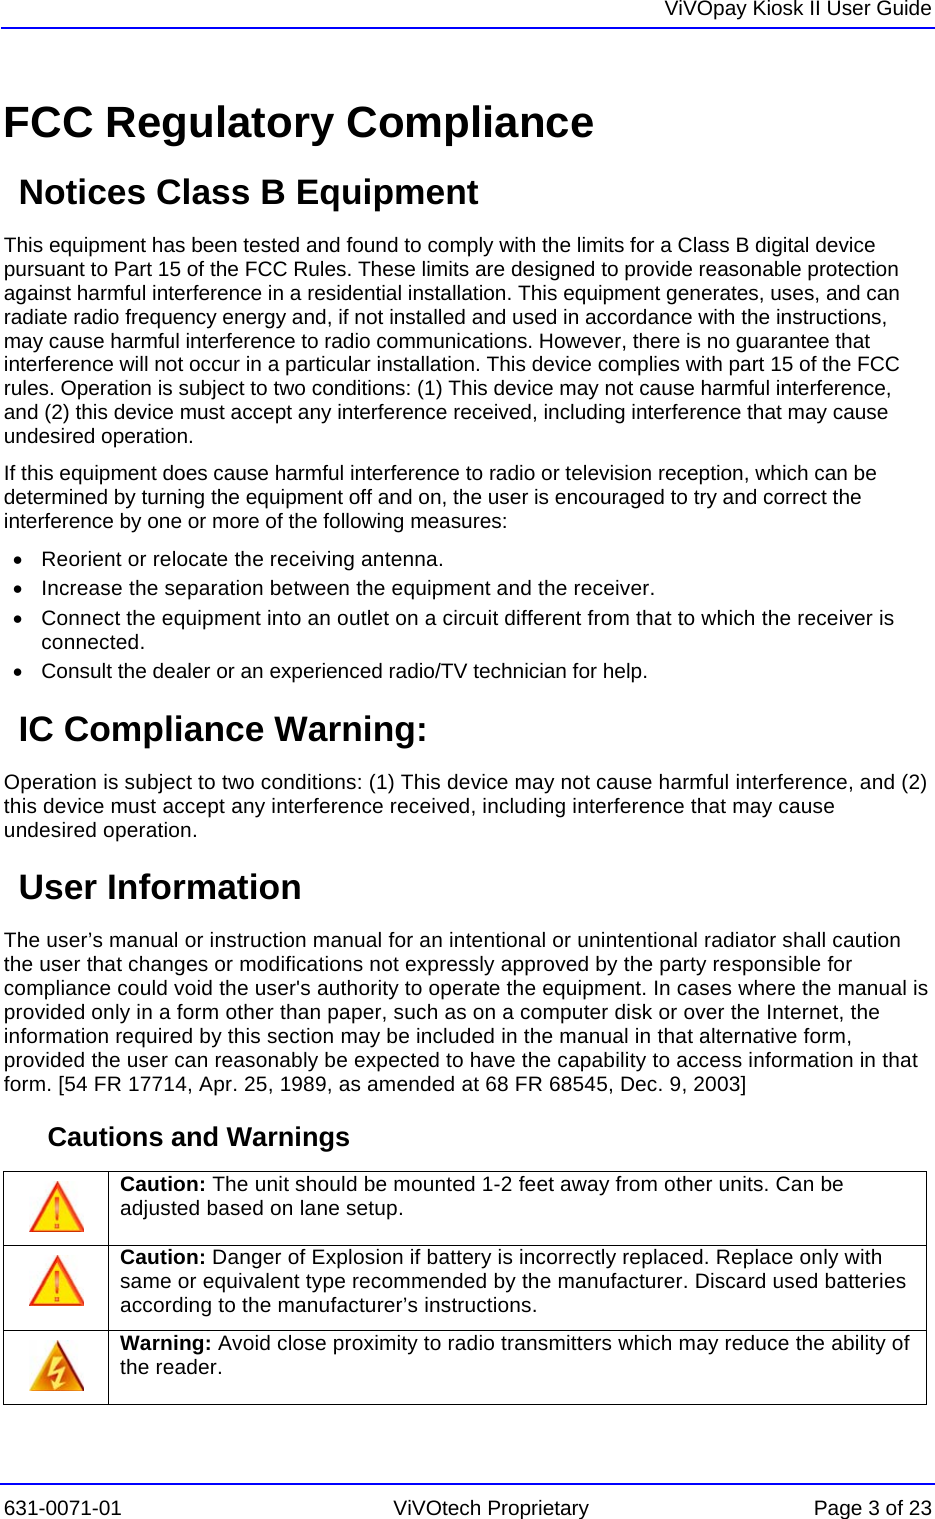   ViVOpay Kiosk II User Guide  631-0071-01 ViVOtech Proprietary Page 3 of 23 FCC Regulatory Compliance Notices Class B Equipment This equipment has been tested and found to comply with the limits for a Class B digital device pursuant to Part 15 of the FCC Rules. These limits are designed to provide reasonable protection against harmful interference in a residential installation. This equipment generates, uses, and can radiate radio frequency energy and, if not installed and used in accordance with the instructions, may cause harmful interference to radio communications. However, there is no guarantee that interference will not occur in a particular installation. This device complies with part 15 of the FCC rules. Operation is subject to two conditions: (1) This device may not cause harmful interference, and (2) this device must accept any interference received, including interference that may cause undesired operation. If this equipment does cause harmful interference to radio or television reception, which can be determined by turning the equipment off and on, the user is encouraged to try and correct the interference by one or more of the following measures: •  Reorient or relocate the receiving antenna.  •  Increase the separation between the equipment and the receiver. •  Connect the equipment into an outlet on a circuit different from that to which the receiver is connected.  •  Consult the dealer or an experienced radio/TV technician for help.  IC Compliance Warning: Operation is subject to two conditions: (1) This device may not cause harmful interference, and (2) this device must accept any interference received, including interference that may cause undesired operation. User Information The user’s manual or instruction manual for an intentional or unintentional radiator shall caution the user that changes or modifications not expressly approved by the party responsible for compliance could void the user&apos;s authority to operate the equipment. In cases where the manual is provided only in a form other than paper, such as on a computer disk or over the Internet, the information required by this section may be included in the manual in that alternative form, provided the user can reasonably be expected to have the capability to access information in that form. [54 FR 17714, Apr. 25, 1989, as amended at 68 FR 68545, Dec. 9, 2003] Cautions and Warnings  Caution: The unit should be mounted 1-2 feet away from other units. Can be adjusted based on lane setup.  Caution: Danger of Explosion if battery is incorrectly replaced. Replace only with same or equivalent type recommended by the manufacturer. Discard used batteries according to the manufacturer’s instructions.  Warning: Avoid close proximity to radio transmitters which may reduce the ability of the reader. 